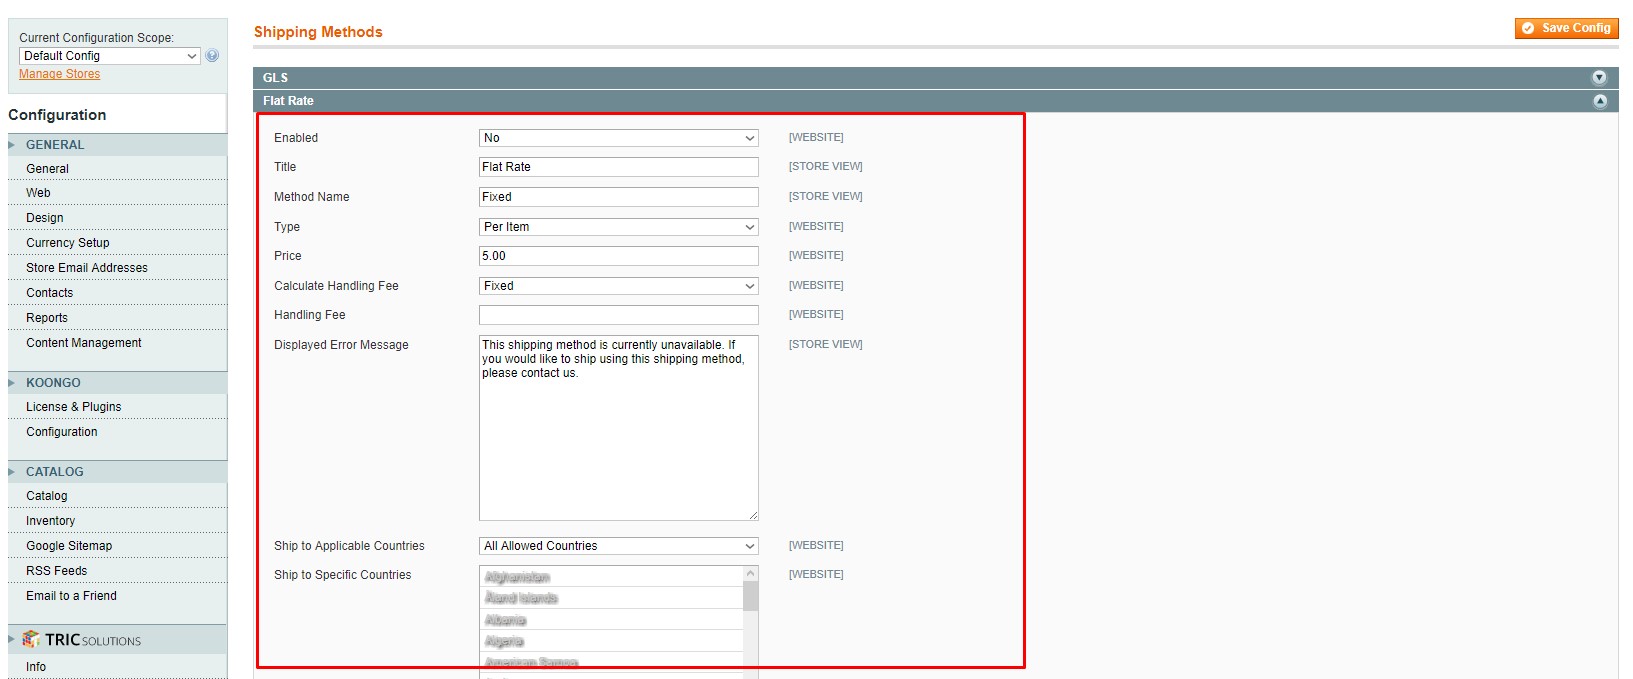 How To Use the Admin Configuration Scopes in Magento 1.9 and 2.2_5